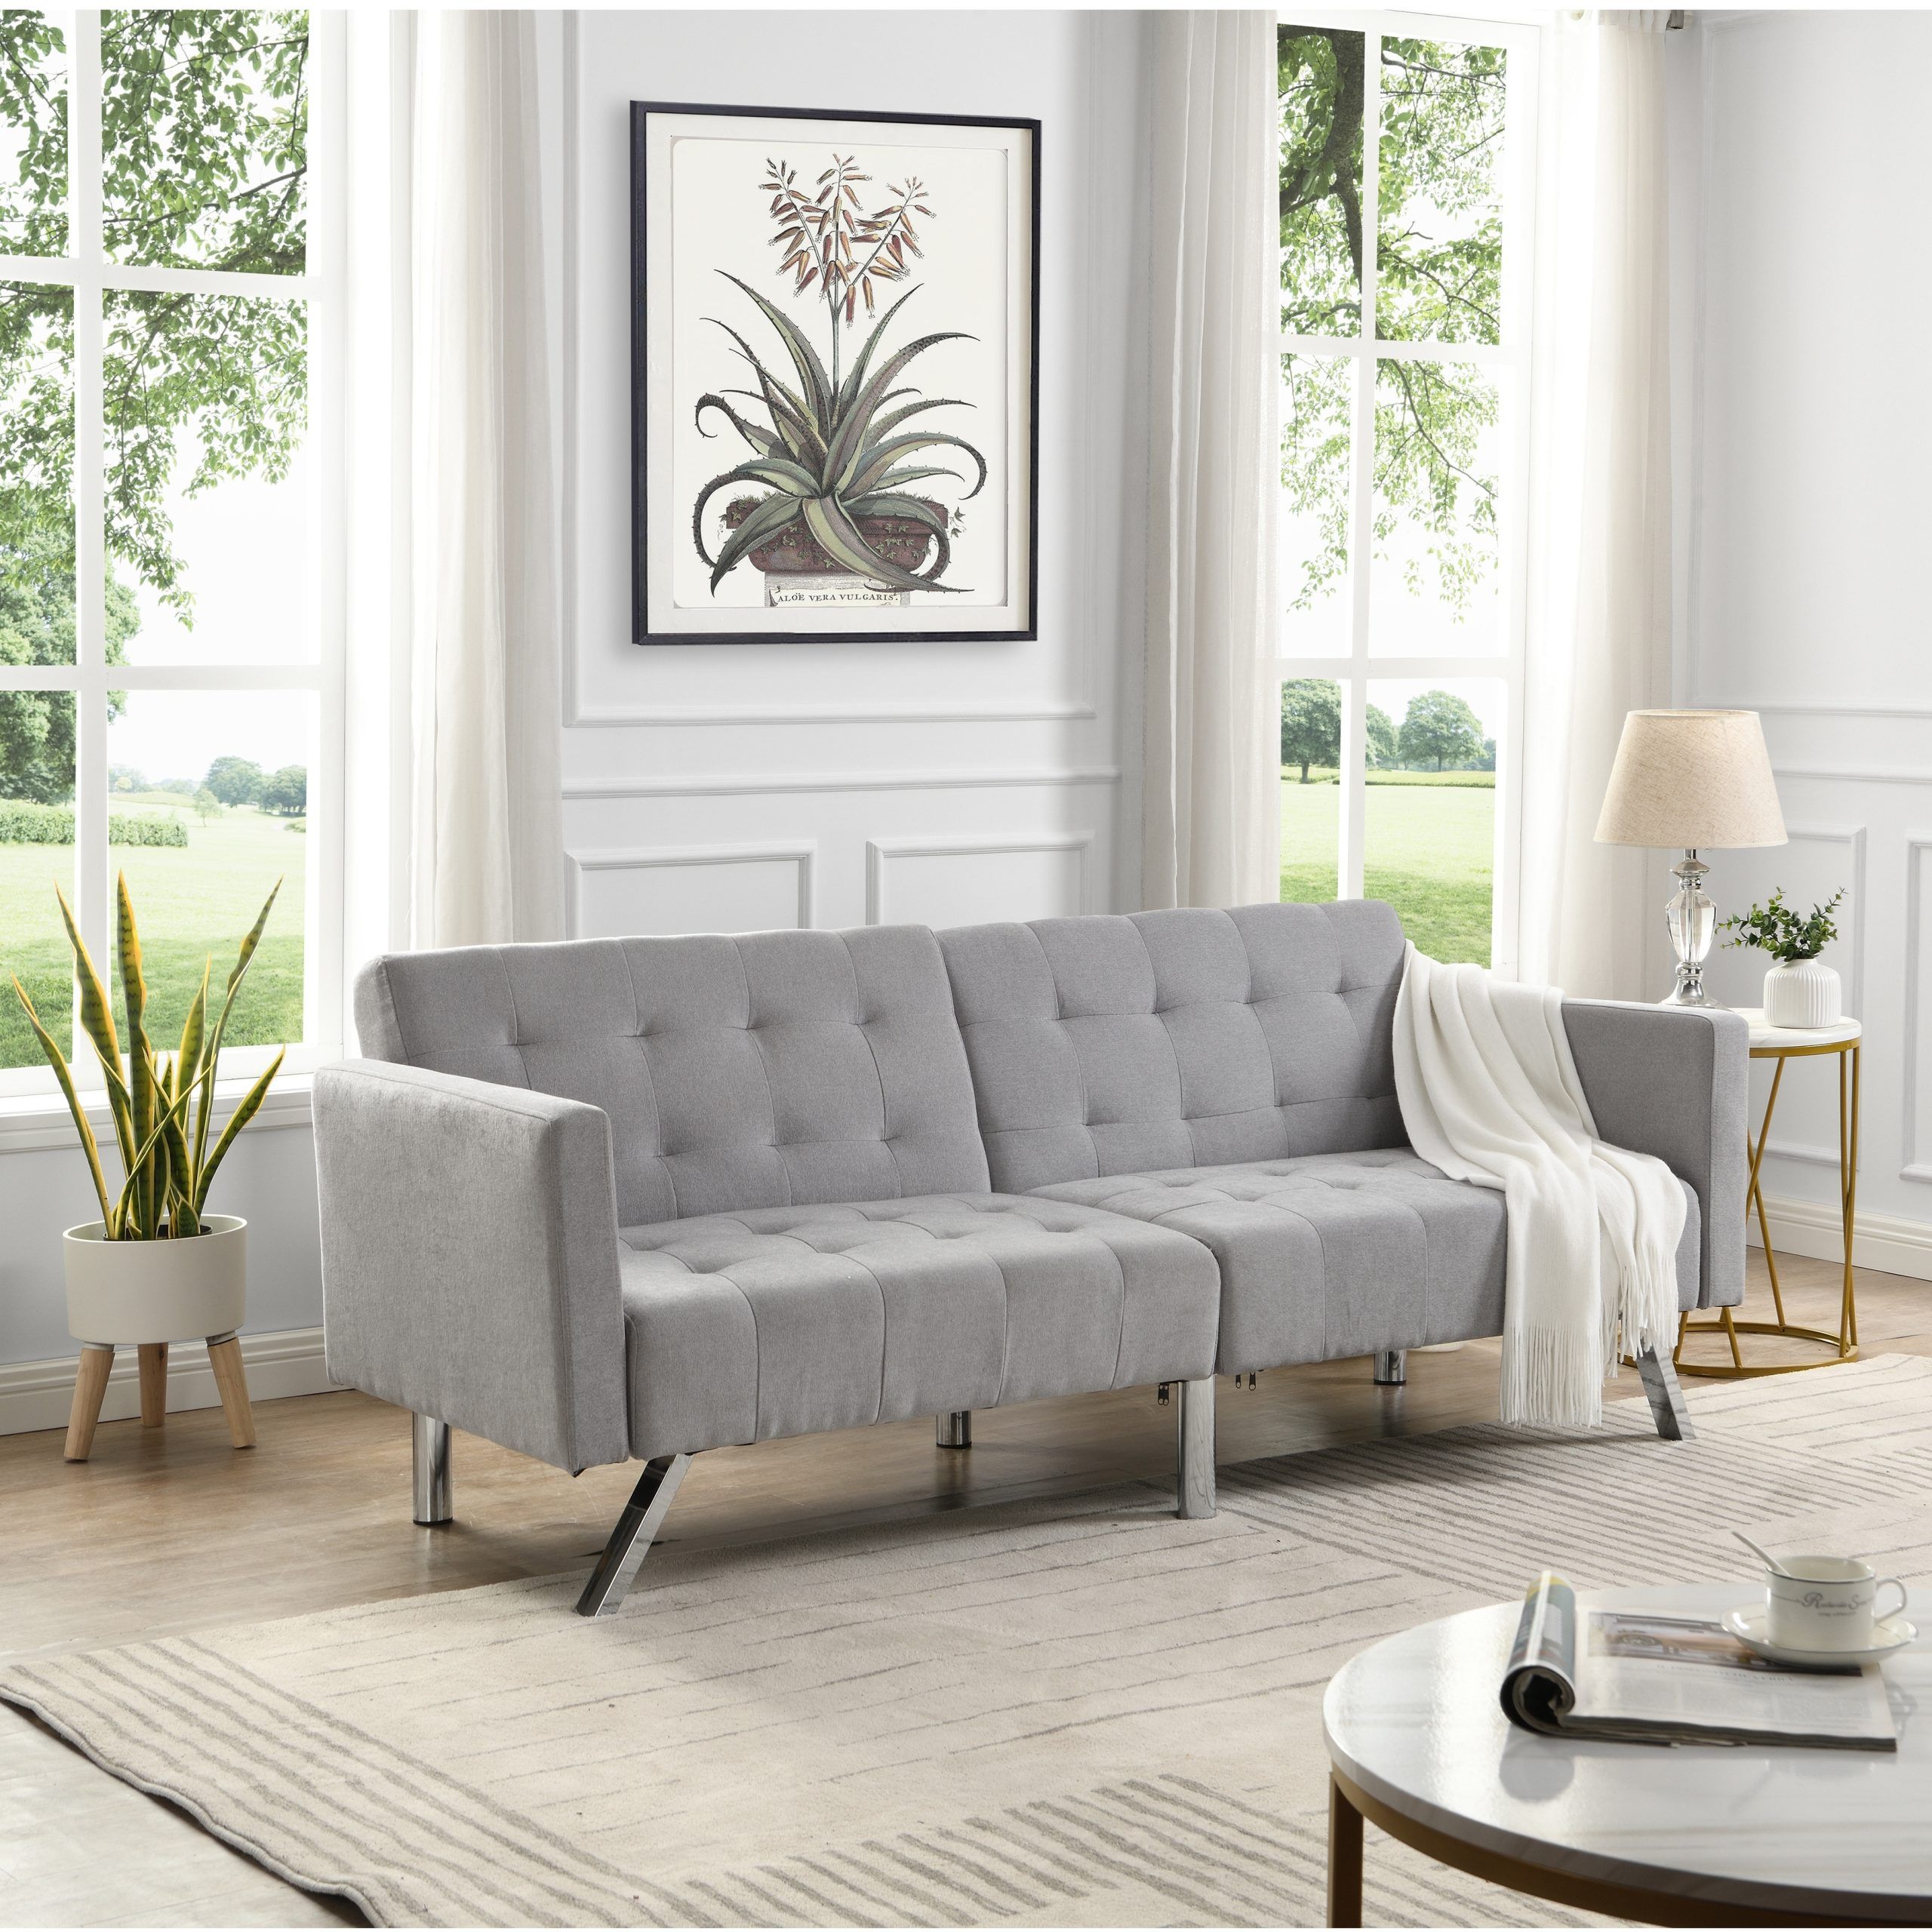 Convertible Folding Light Grey Sleeper Sofa With Armrests – Bed Bath &  Beyond – 37284175 Pertaining To Convertible Light Gray Chair Beds (Photo 9 of 15)